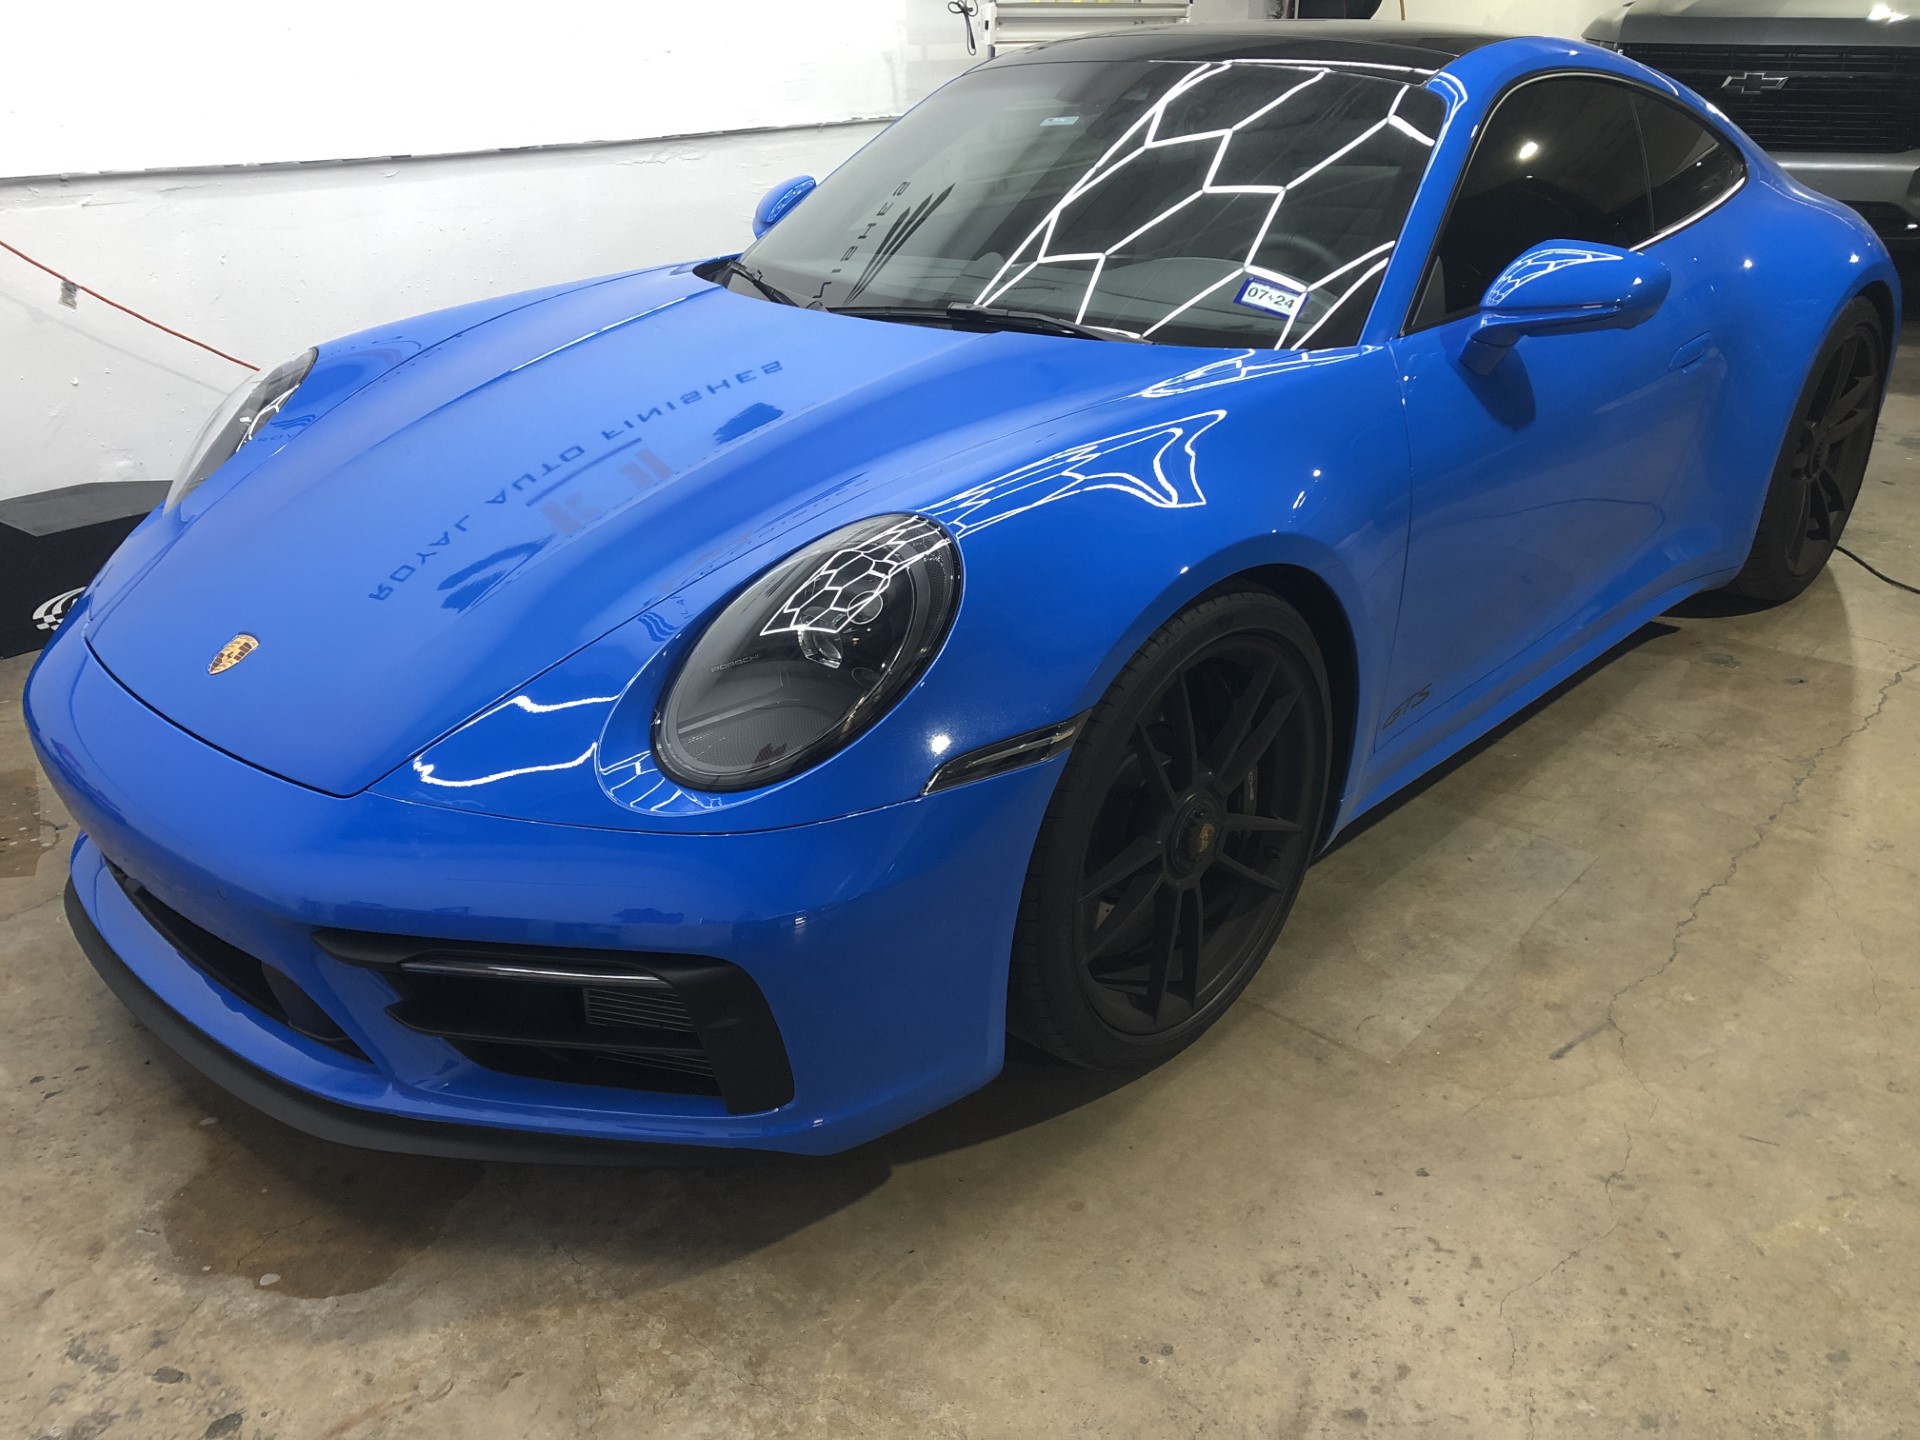 a blue sports car parked in a garage 